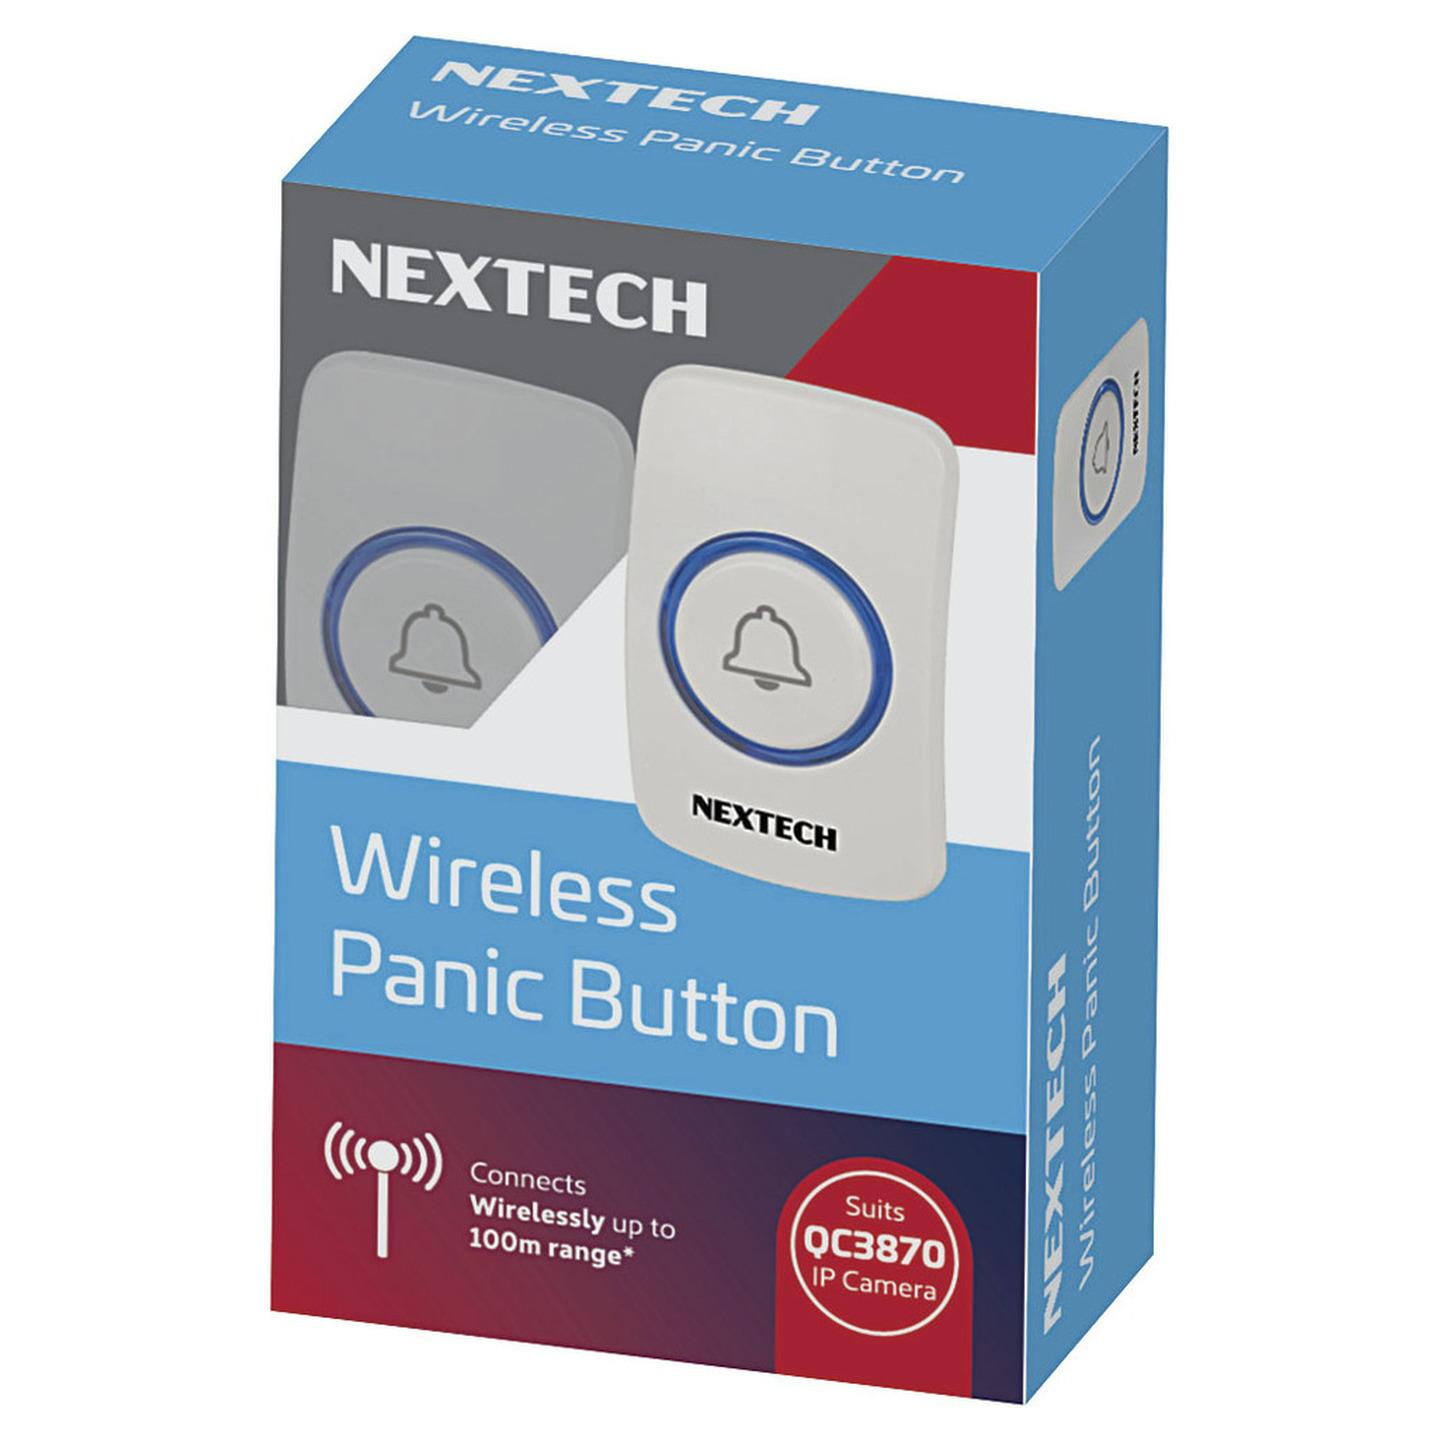 Wireless Panic Button to suit QC3870 Wi-Fi Camera System